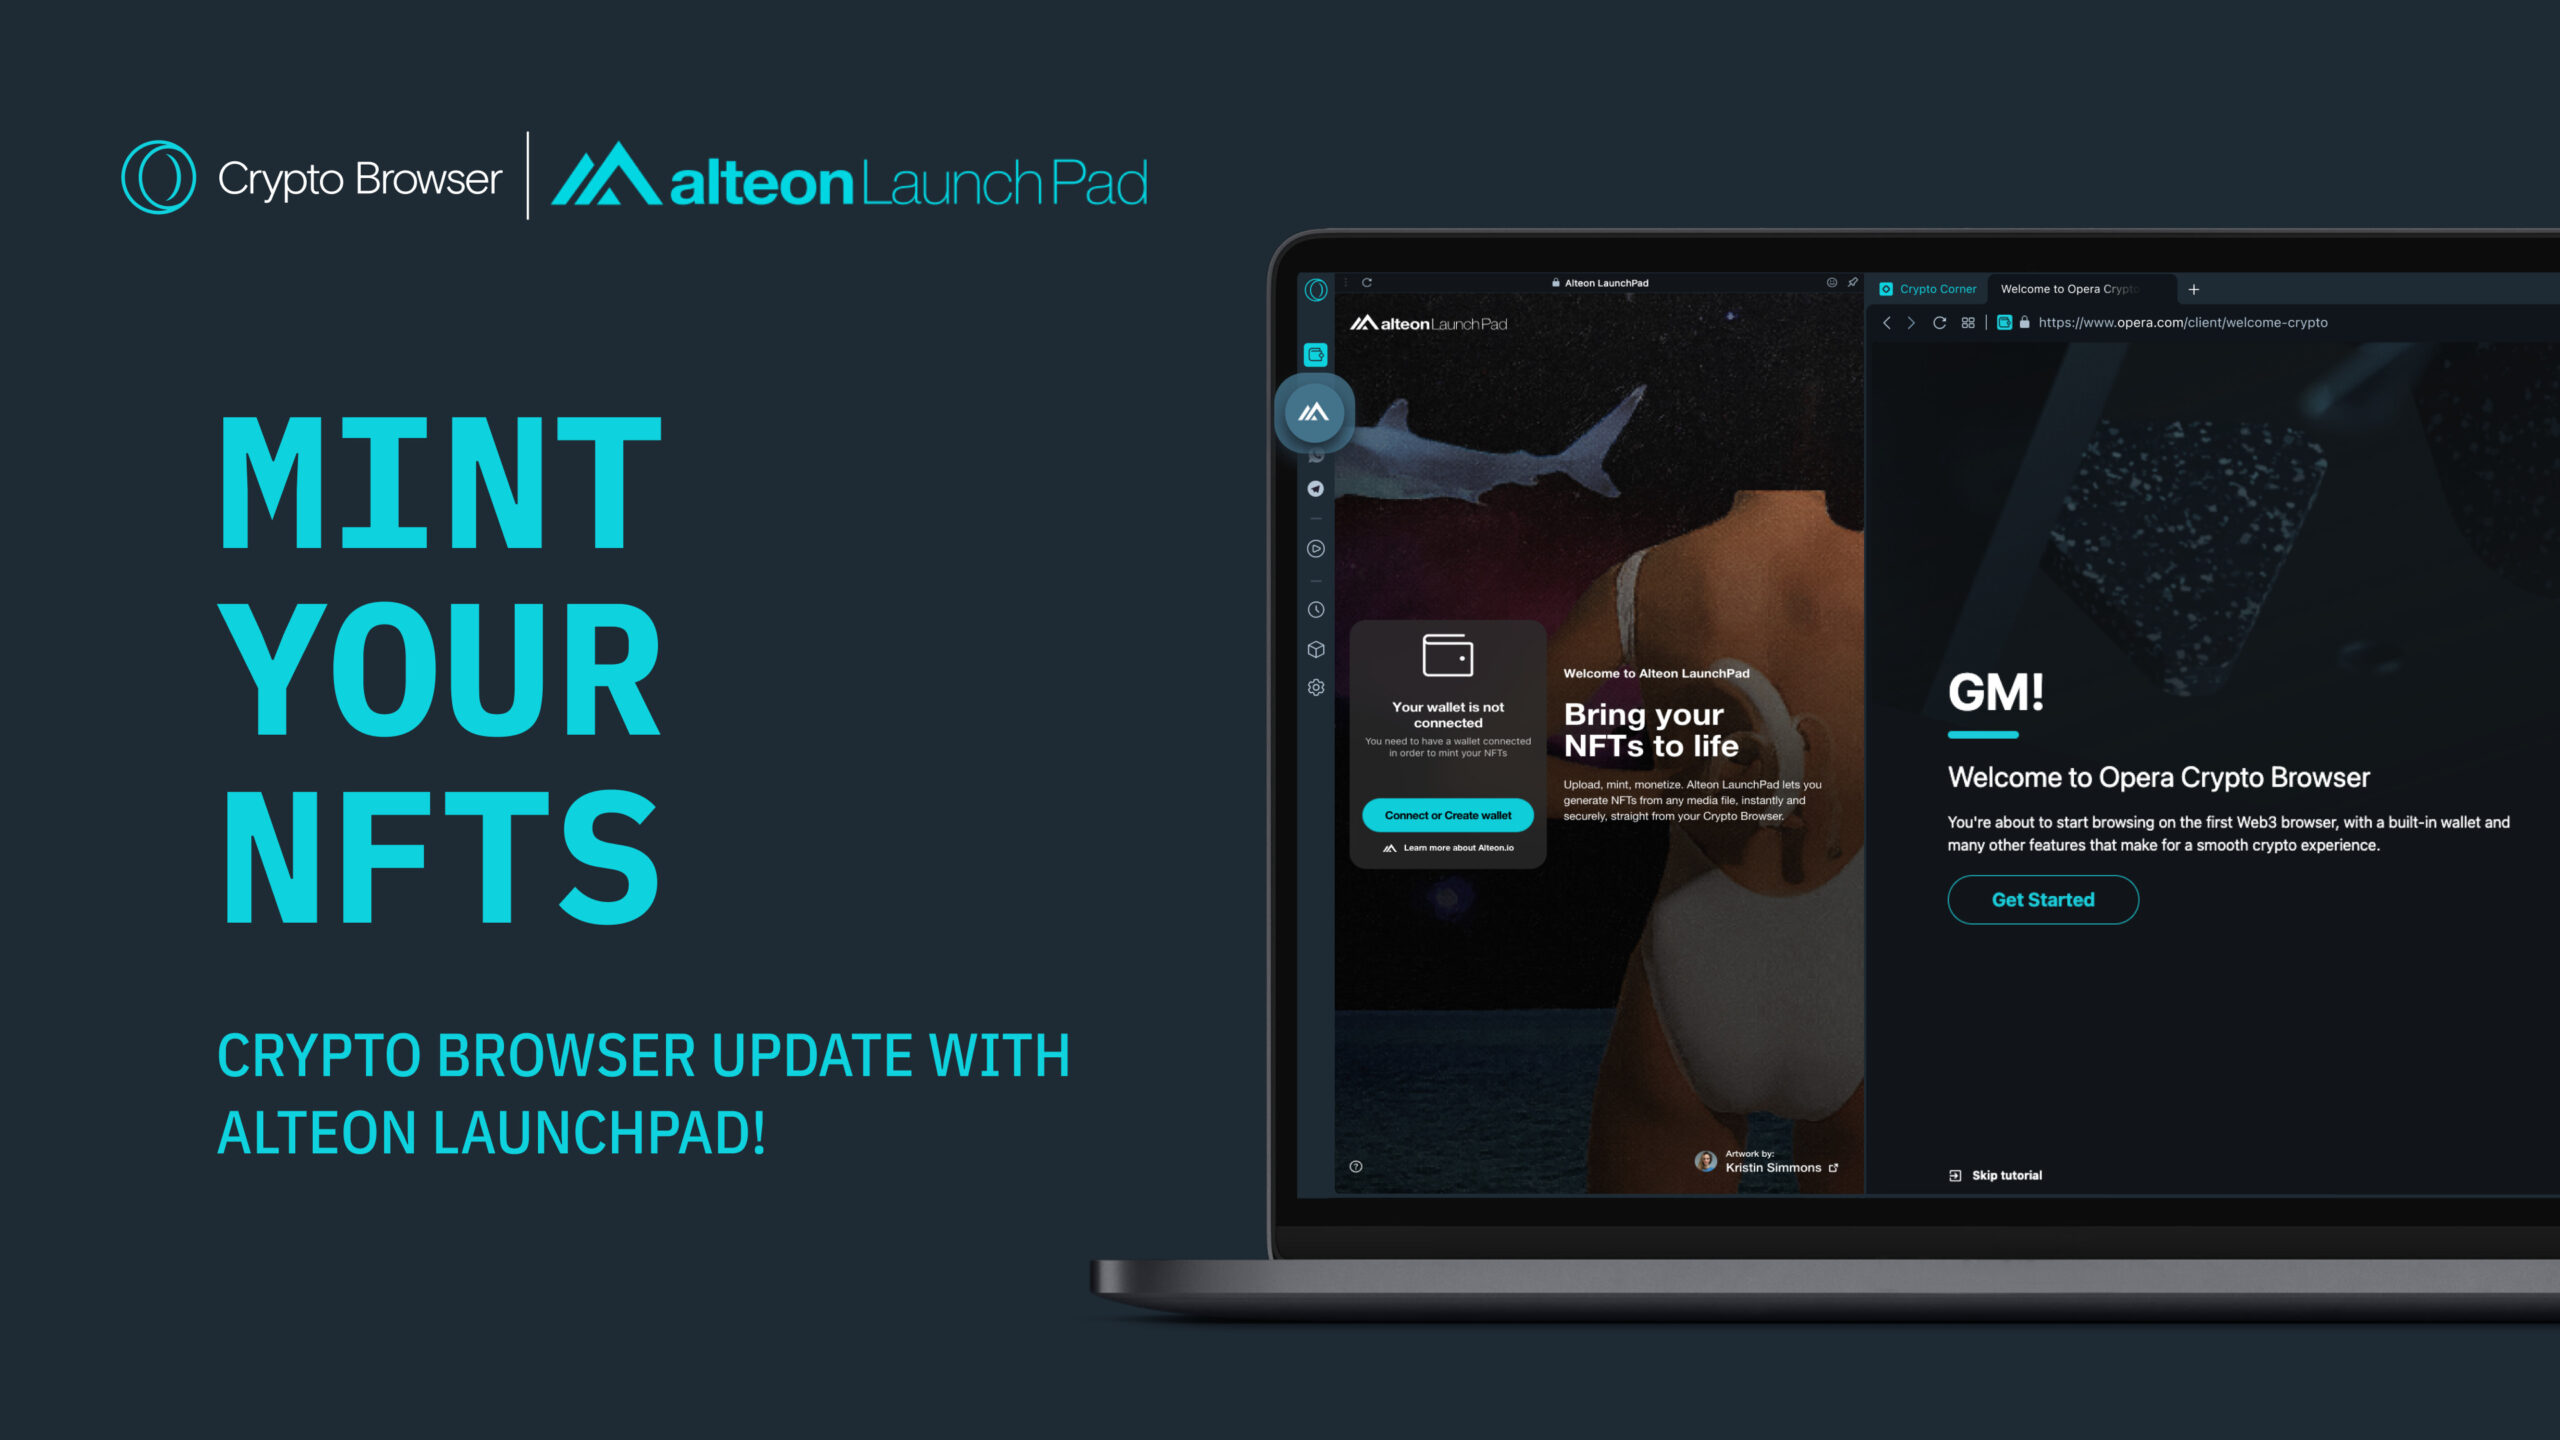 Mint your NFTs directly in Opera Crypto Browser with Alteon Launchpad